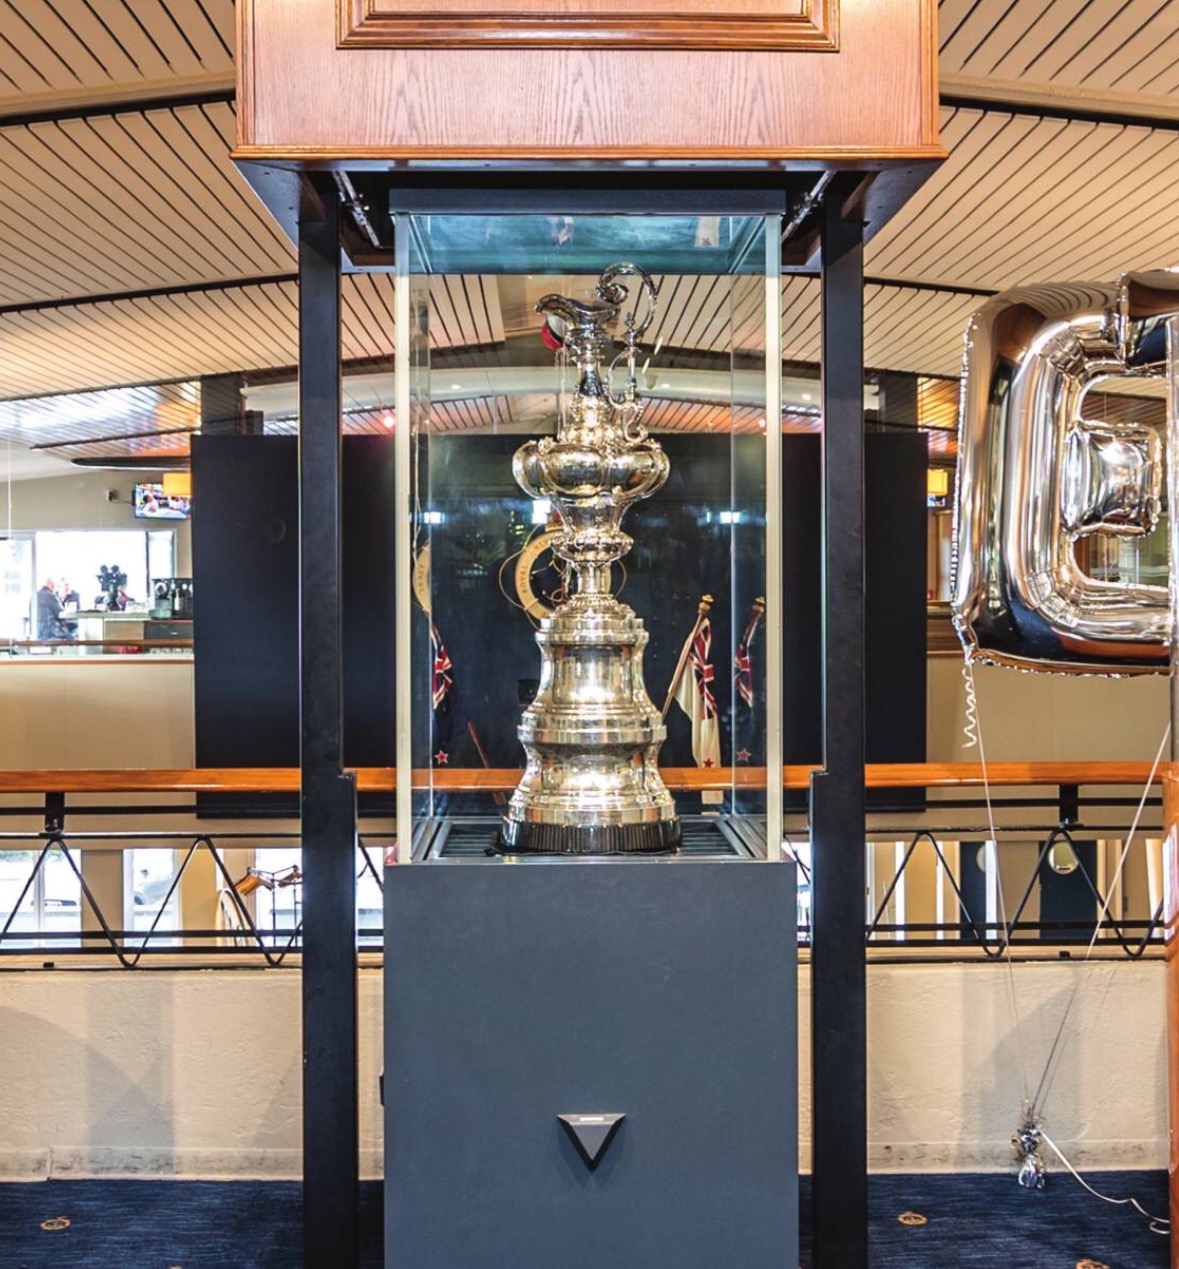 America's cup ad Auckland presso il Royal New Zealand Yacht Squadron